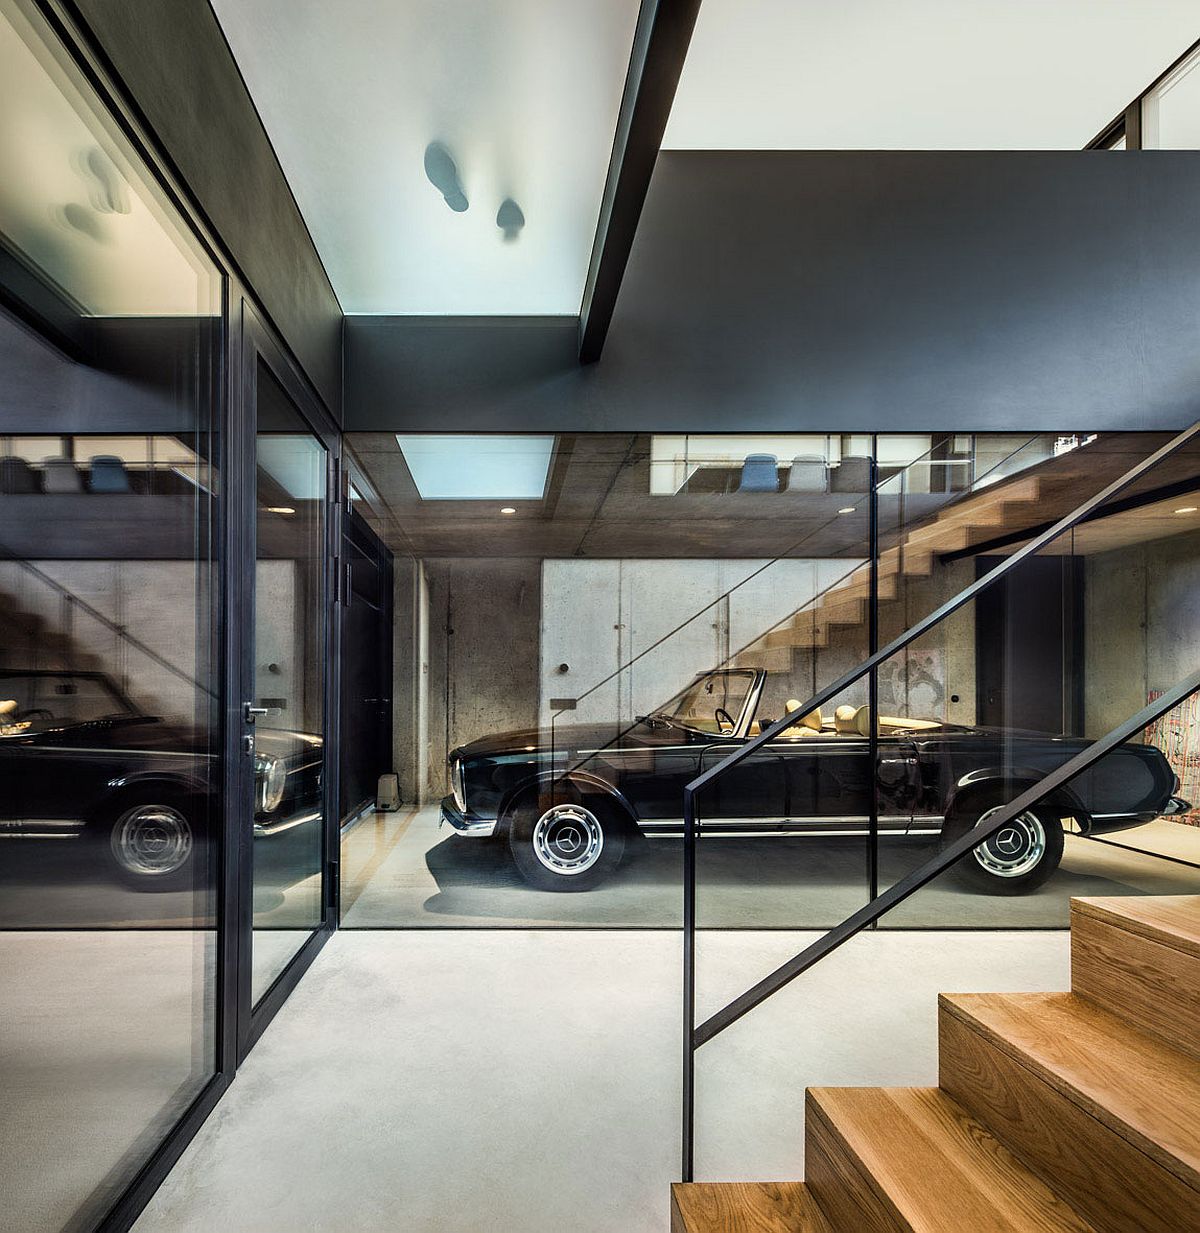 Displayed vintage car becomes a part of the interior